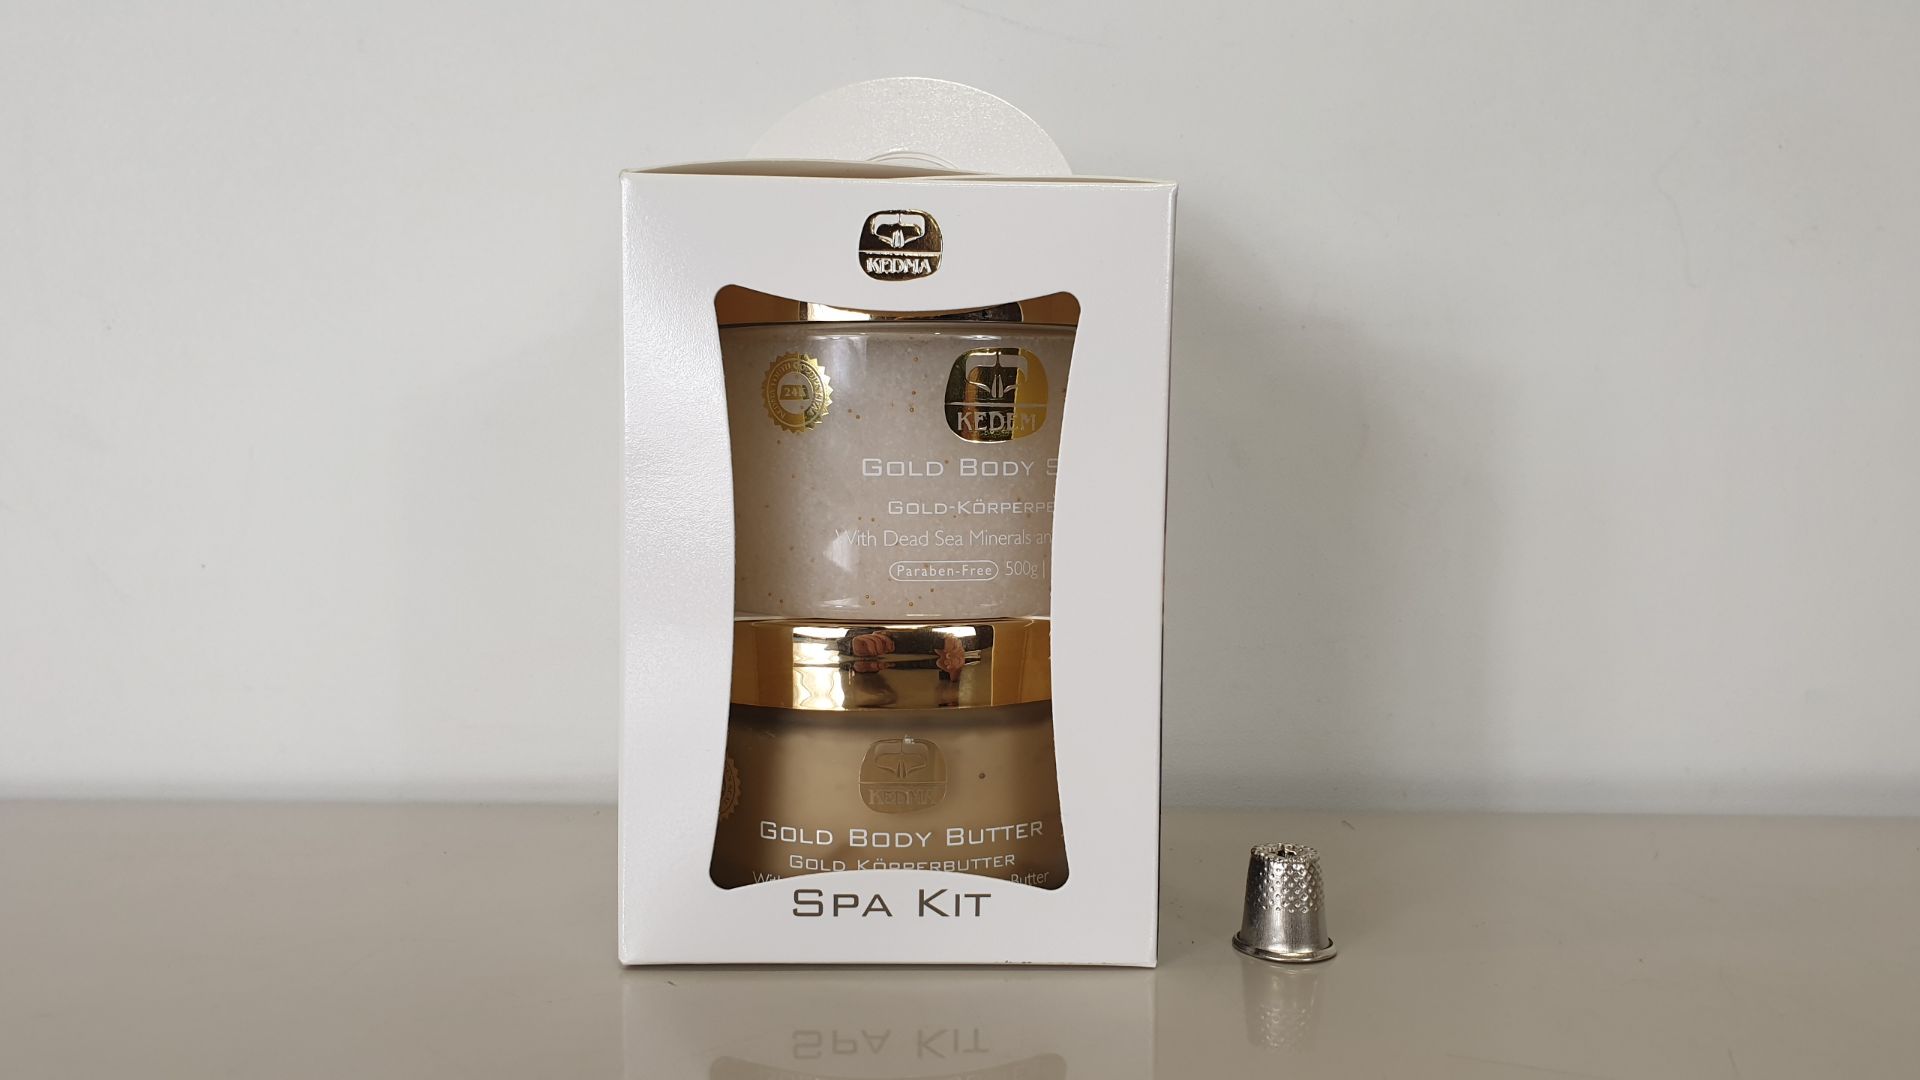 4 X BRAND NEW KEDEM SPA KIT WITH GOLD BODY SCRUB AND GOLD BODY BUTTER 500g / 200g